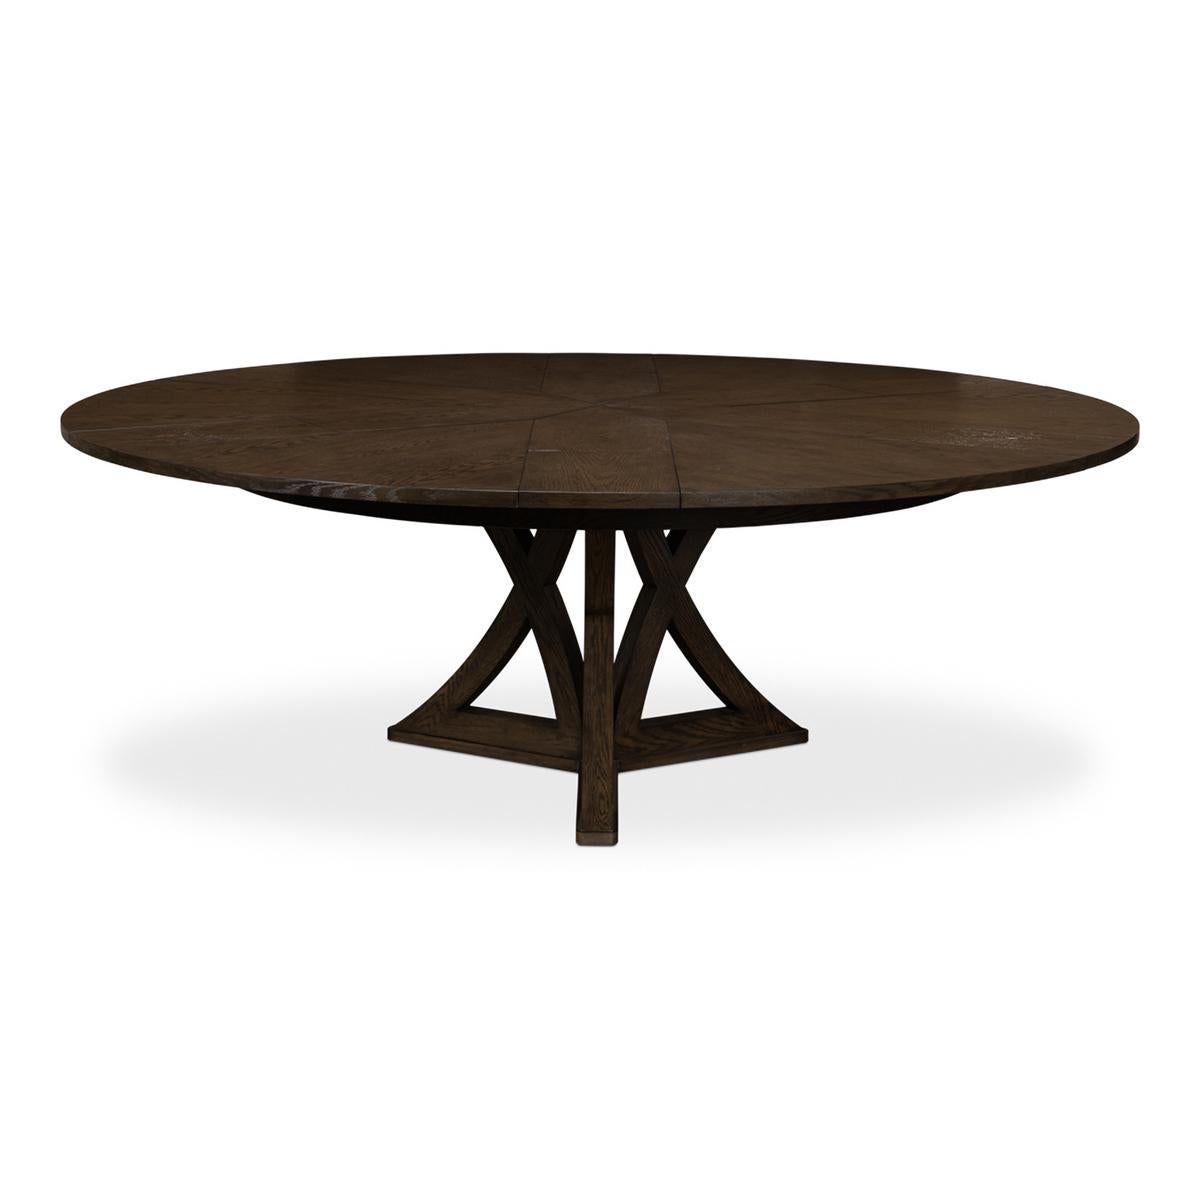 Contemporary Rustic Round Dining Table, Artisan Grey For Sale